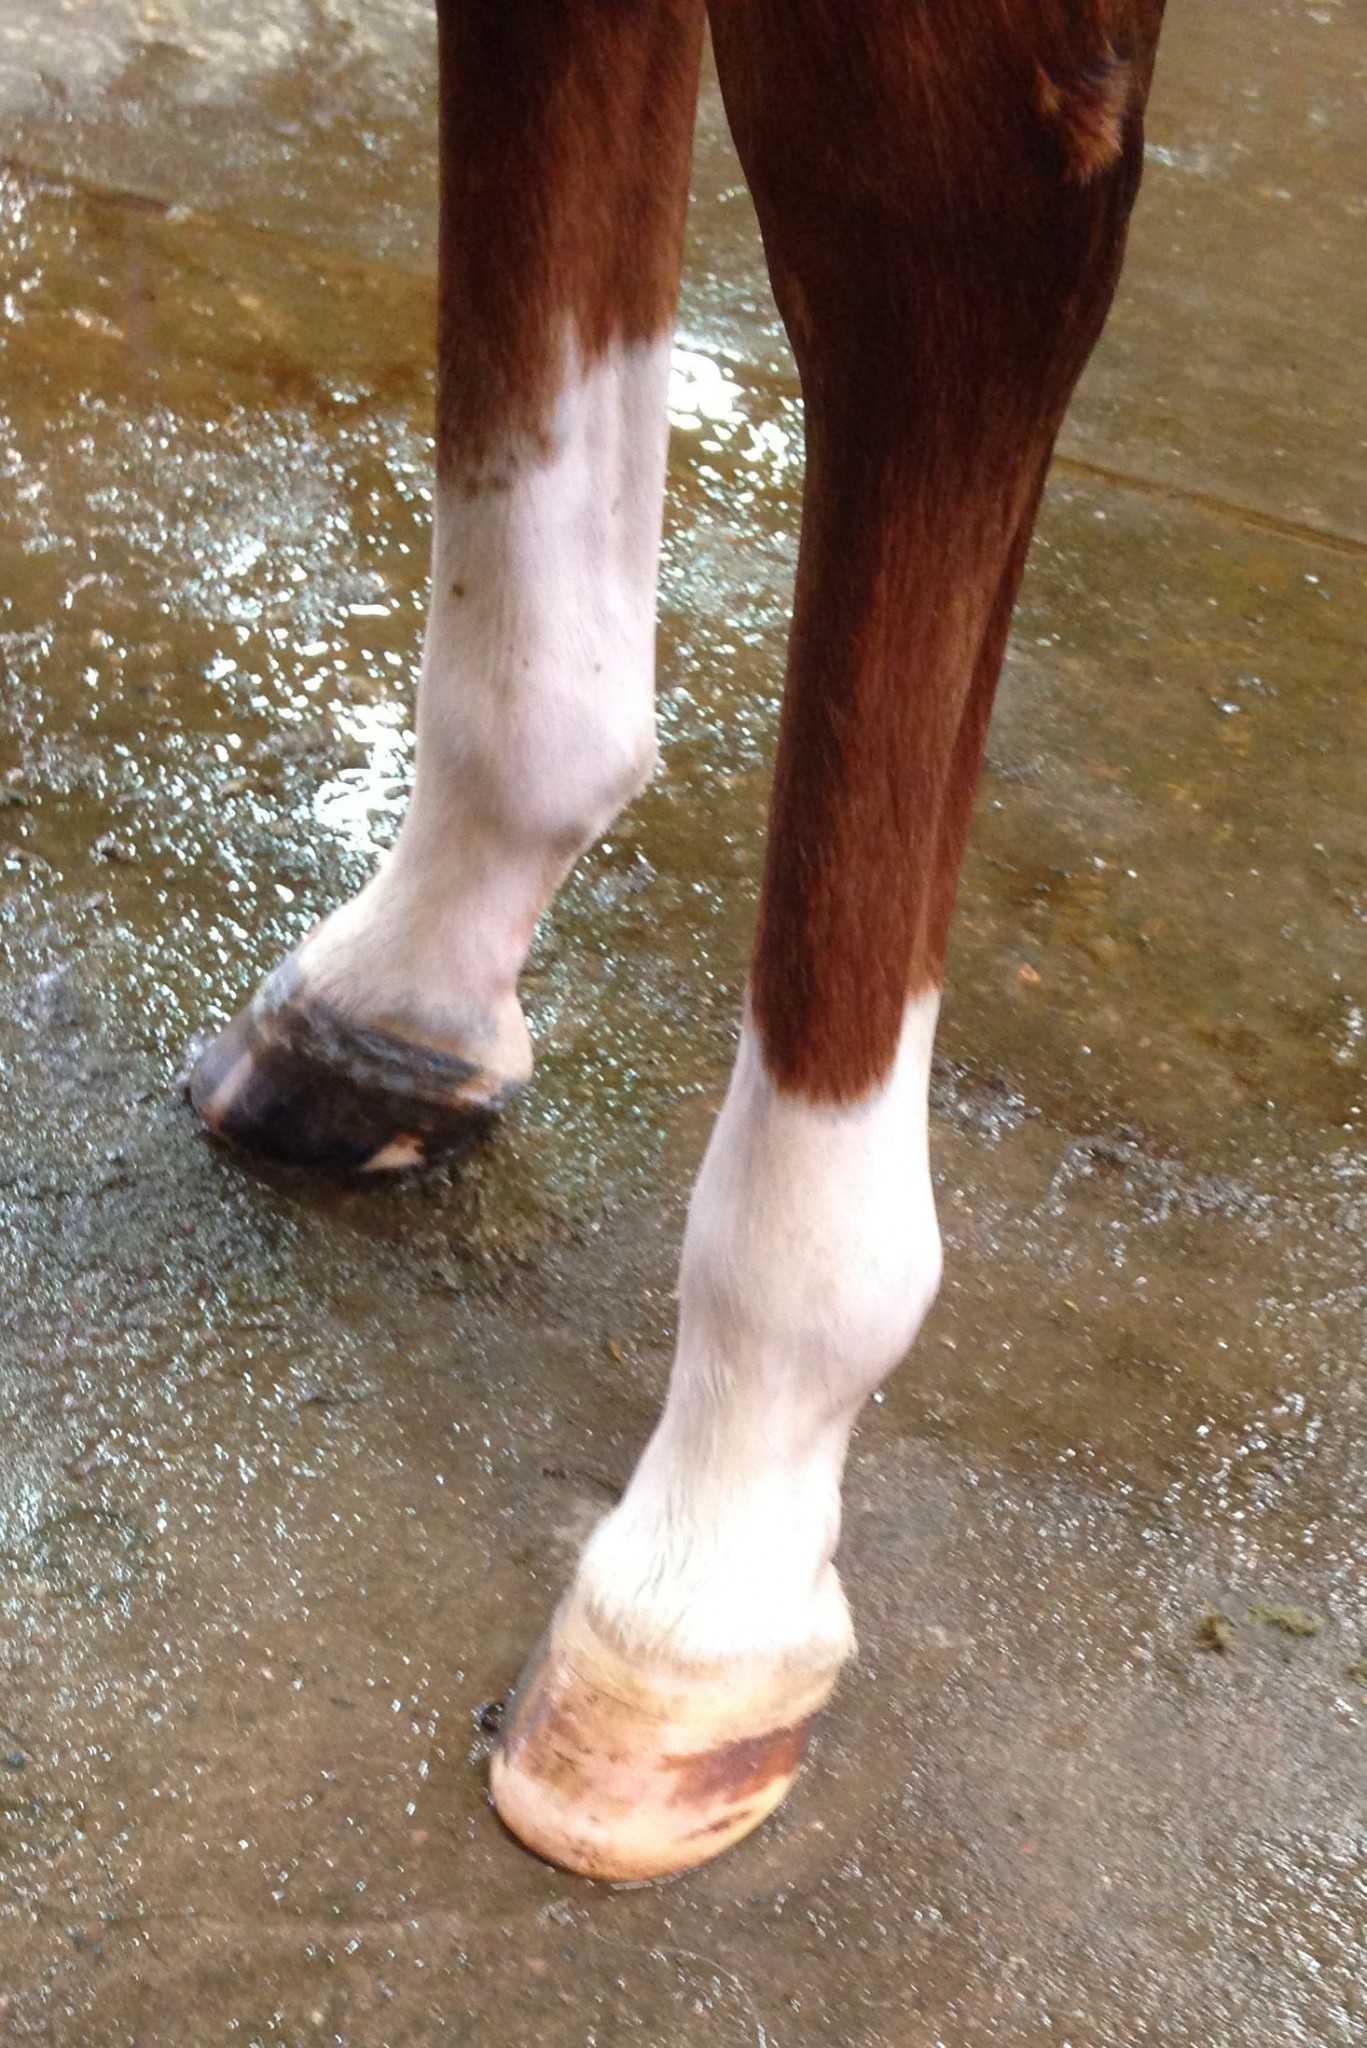 A pair of freshly trimmed back hooves on a young horse. Photo credit Dixie Crowe